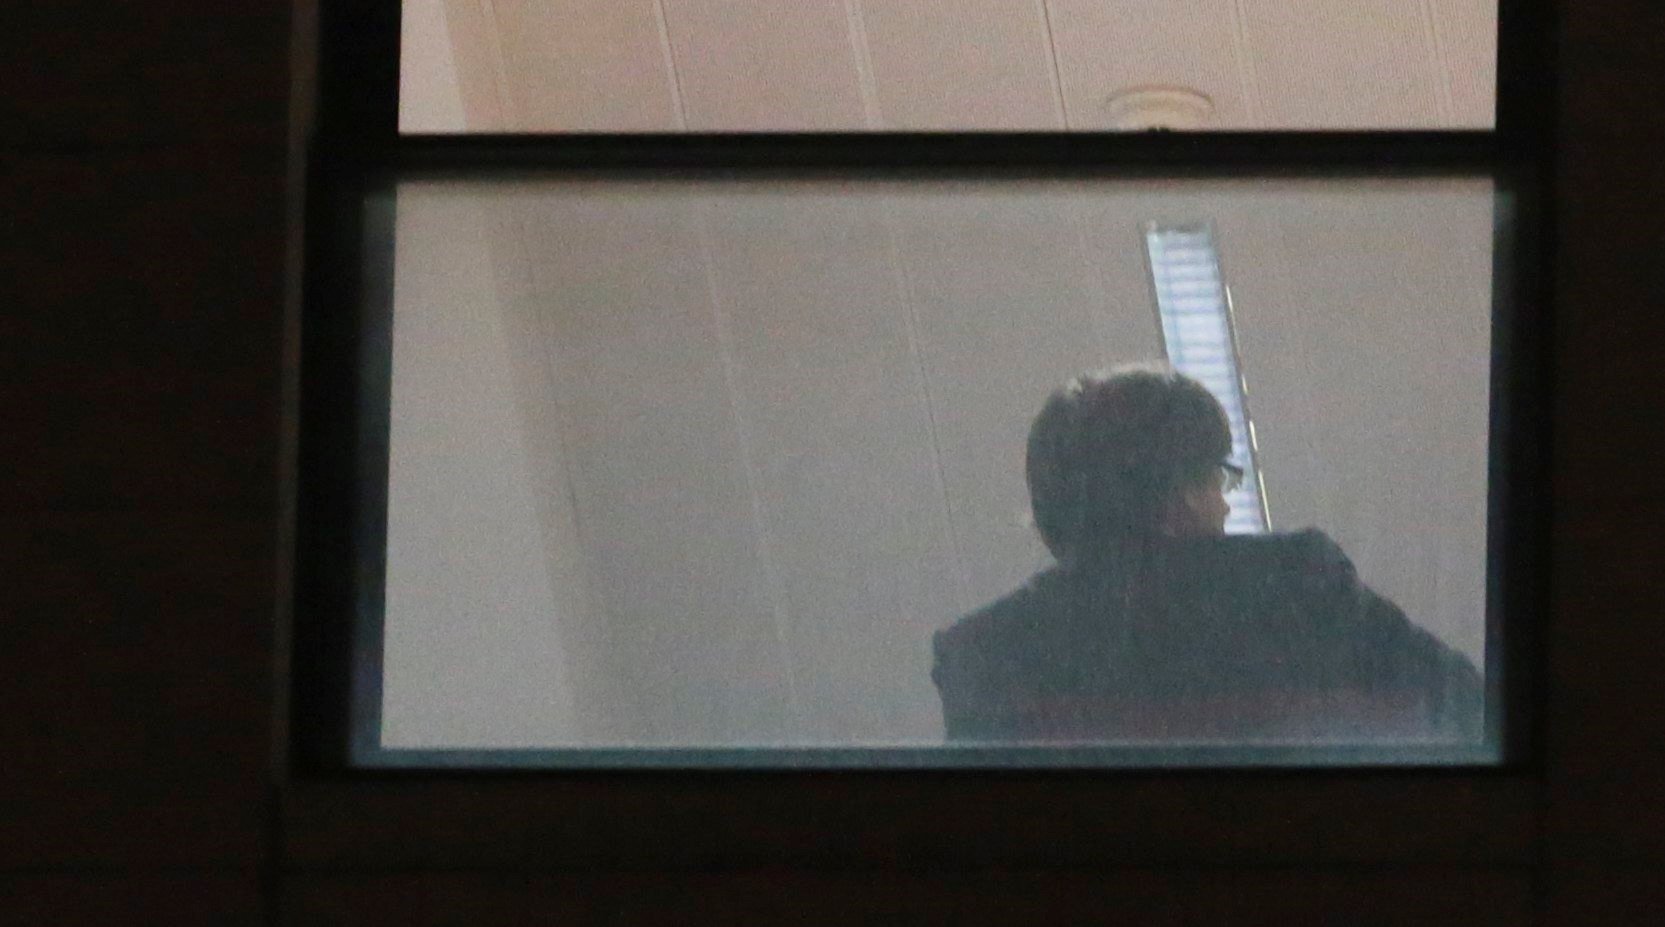 Belgian prosecutors ask for Puigdemont and ministers to be extradited